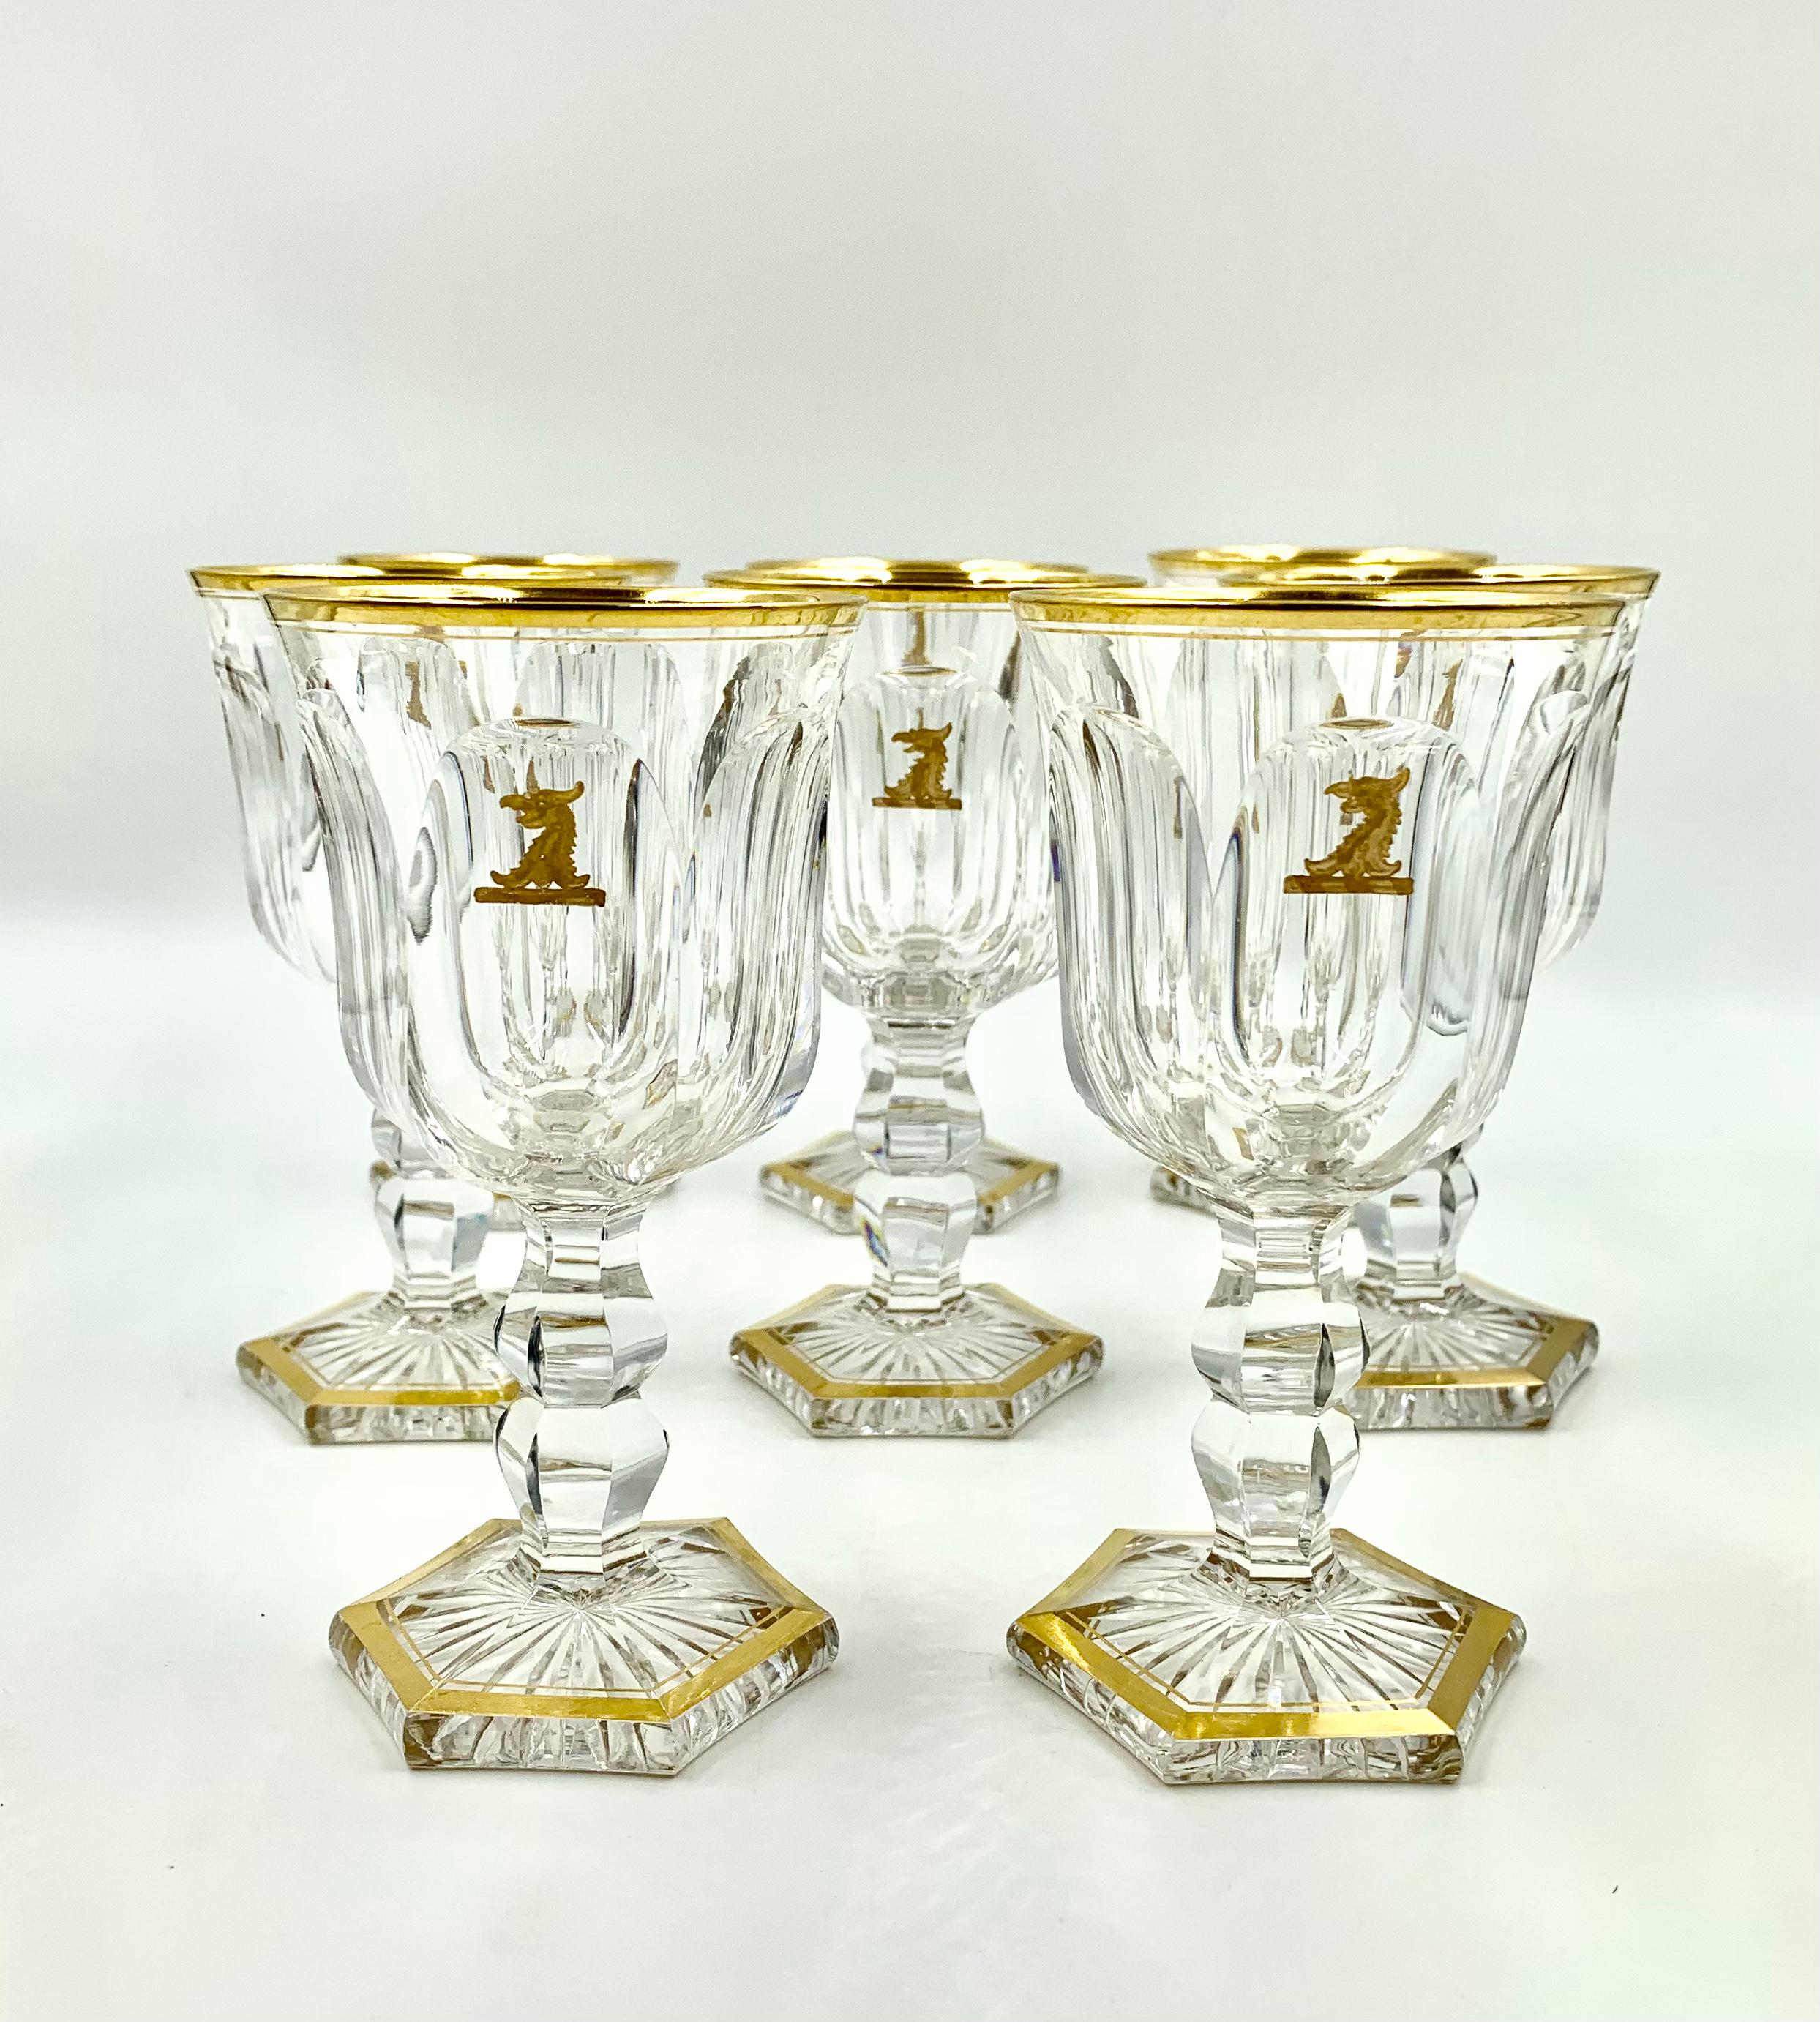 Antique Baccarat Crystal Empire Armorial Crest 34 Piece Stemware Service for 8 For Sale 6